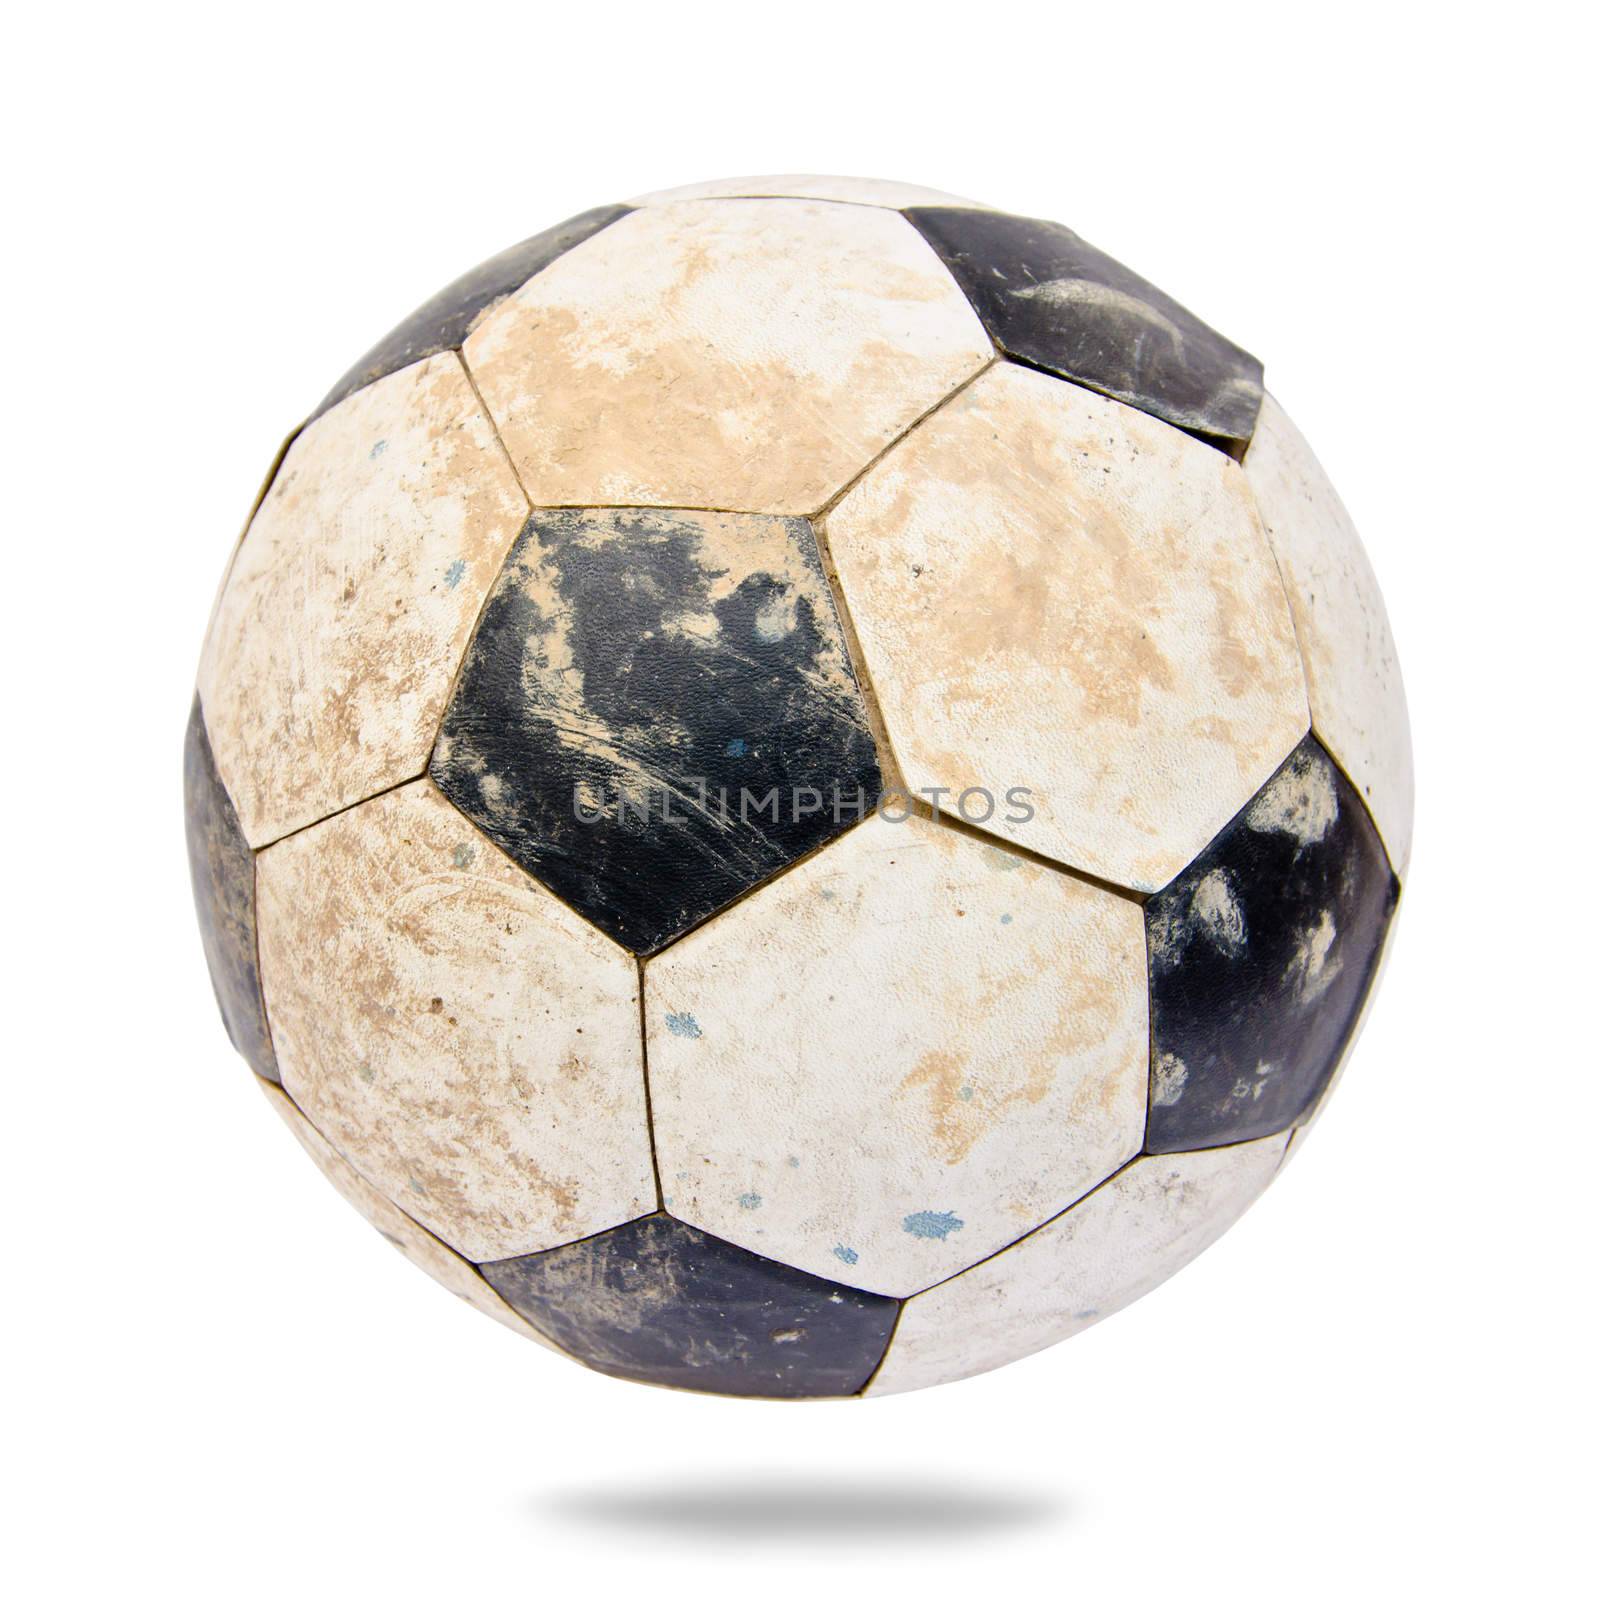 old leather soccer ball by Gamjai